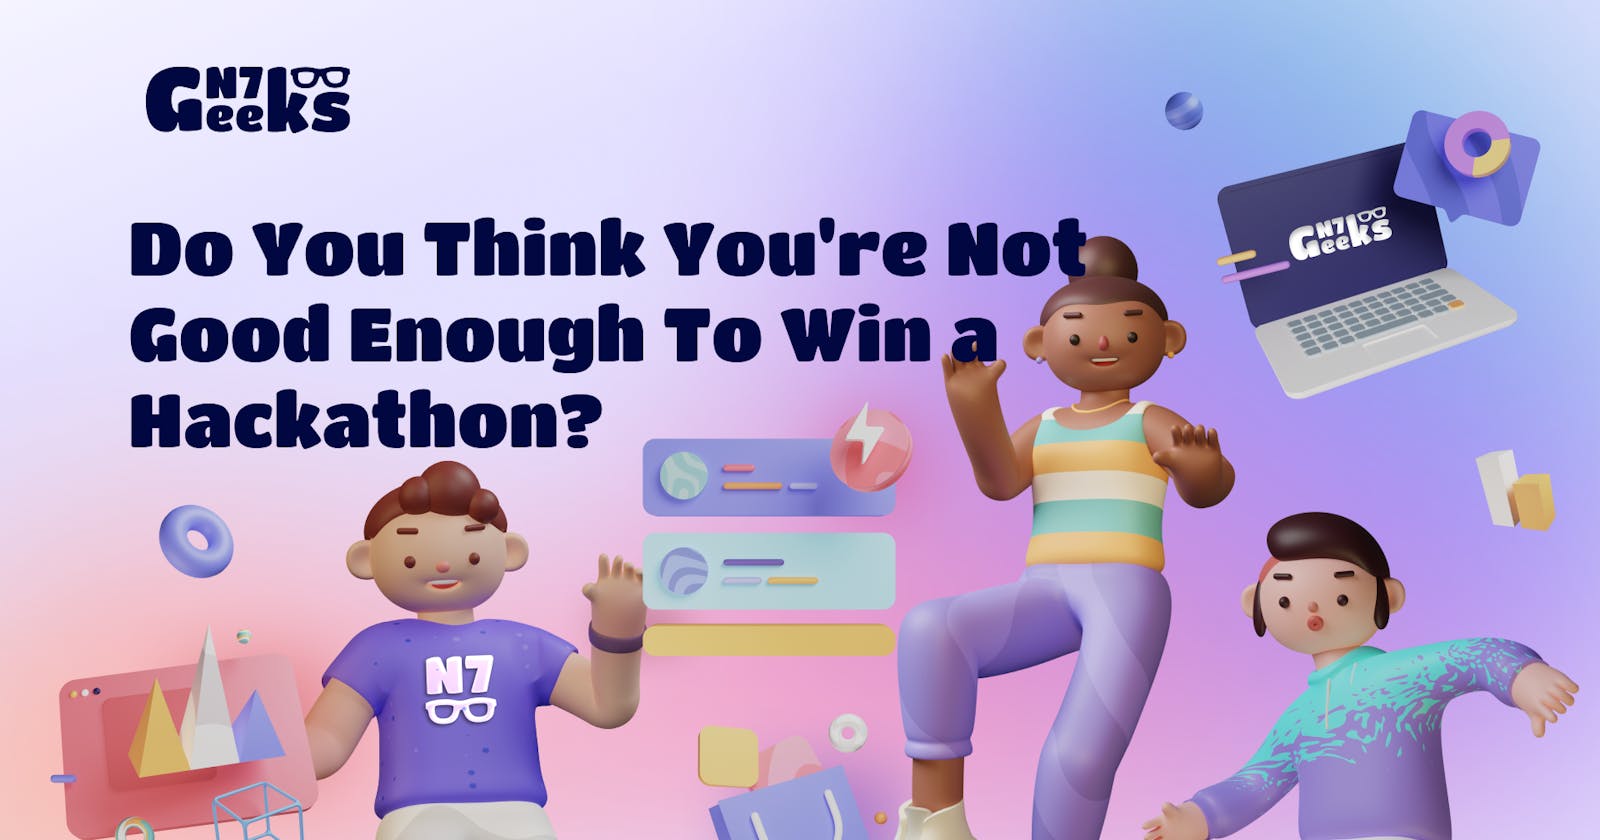 From Ideas to Victory: How to Win and Make the Most of a Hackathon Experience